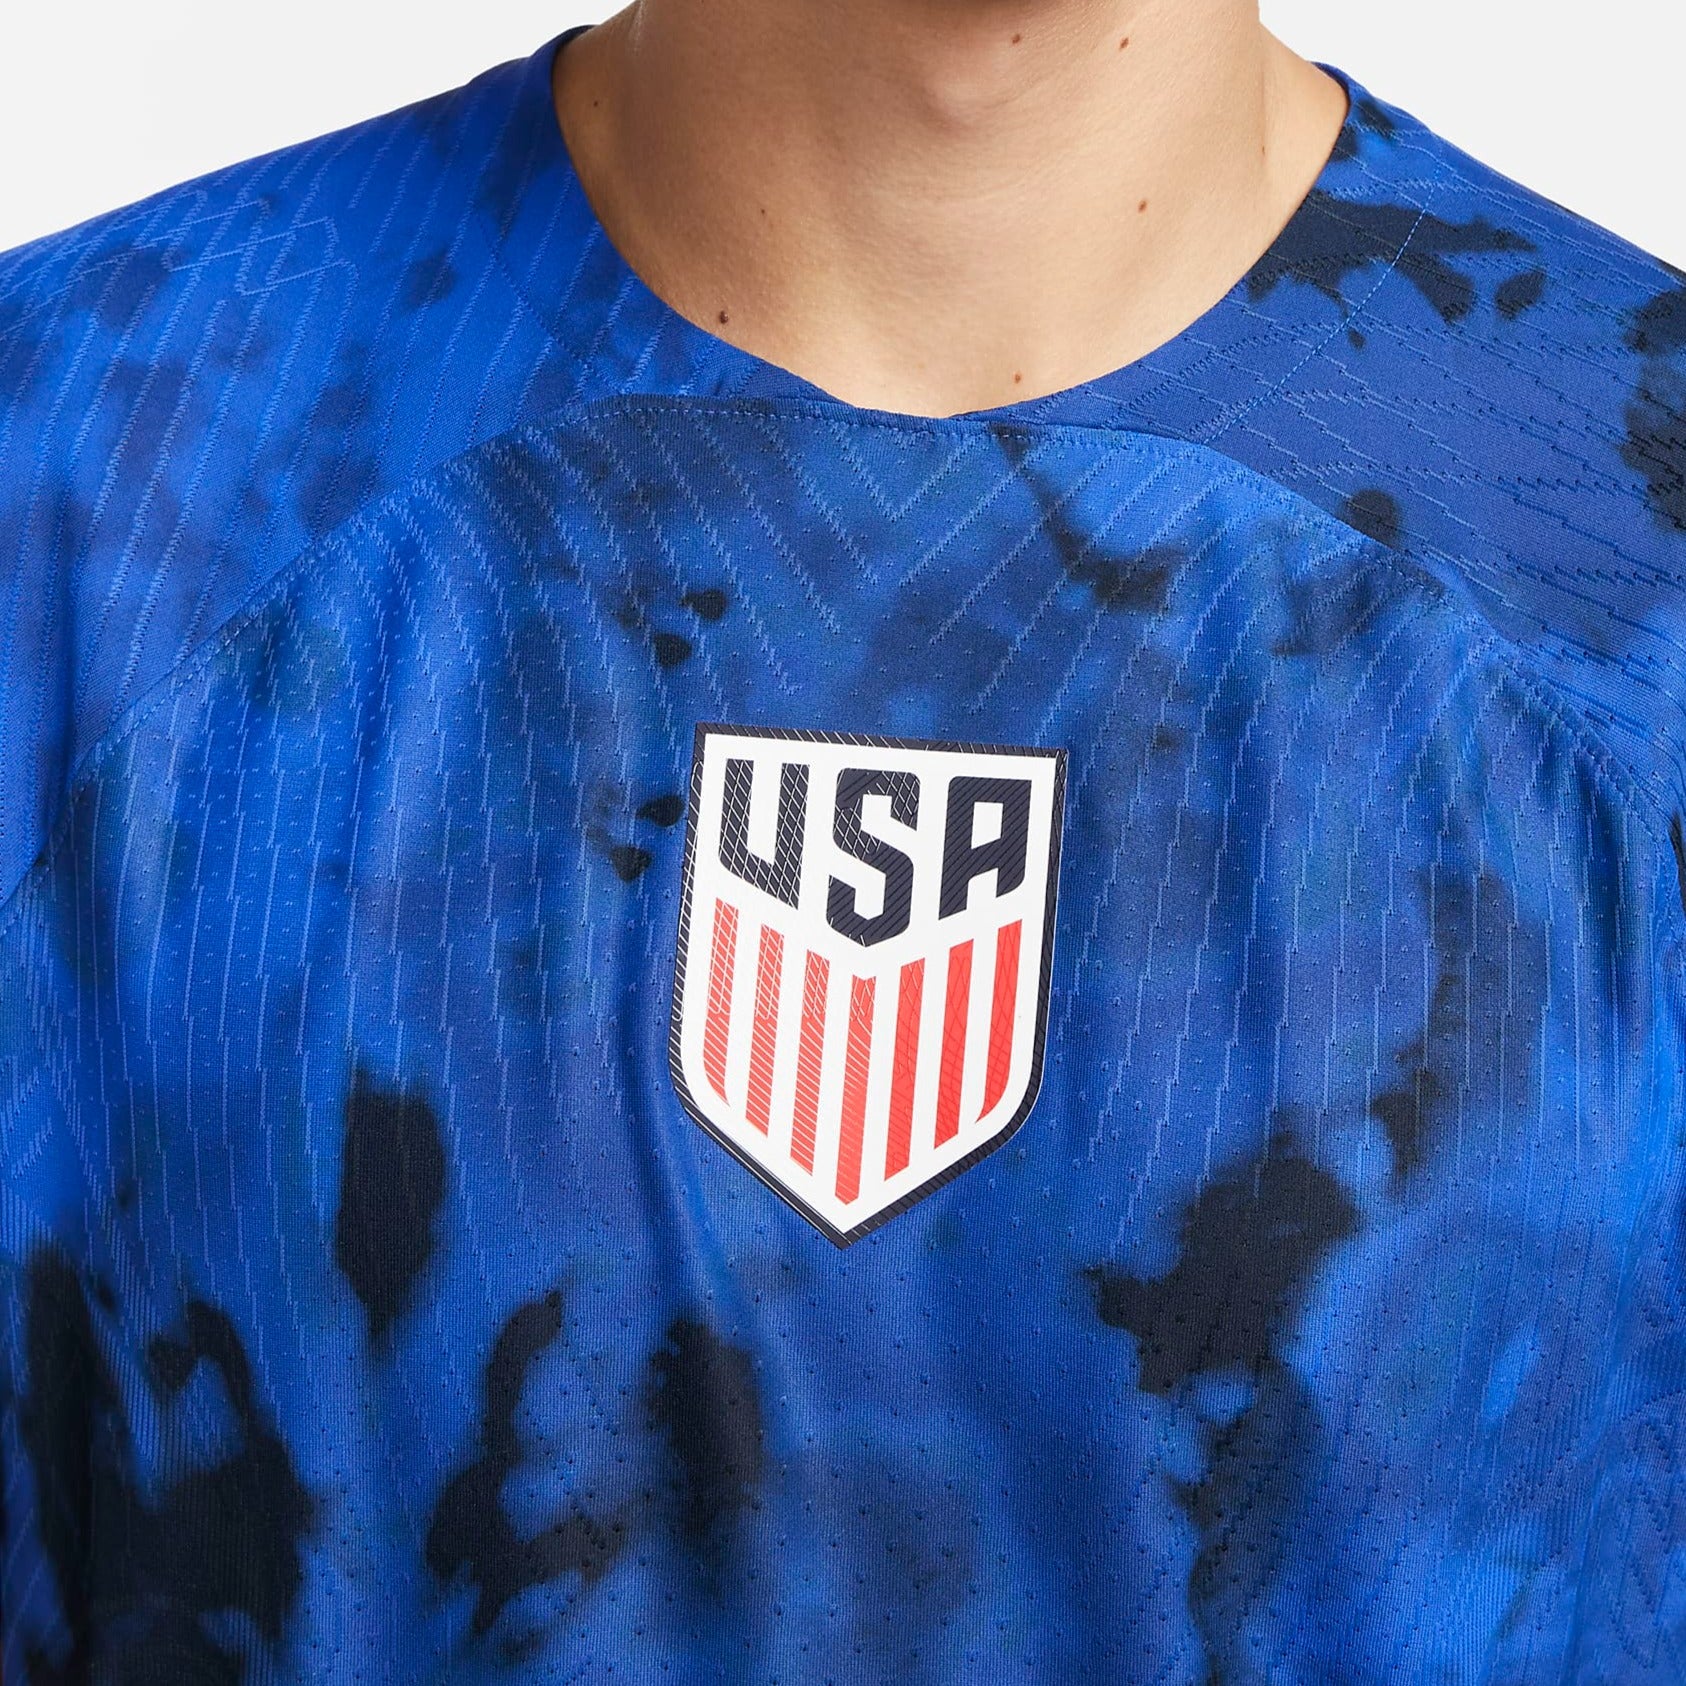 us soccer official jersey